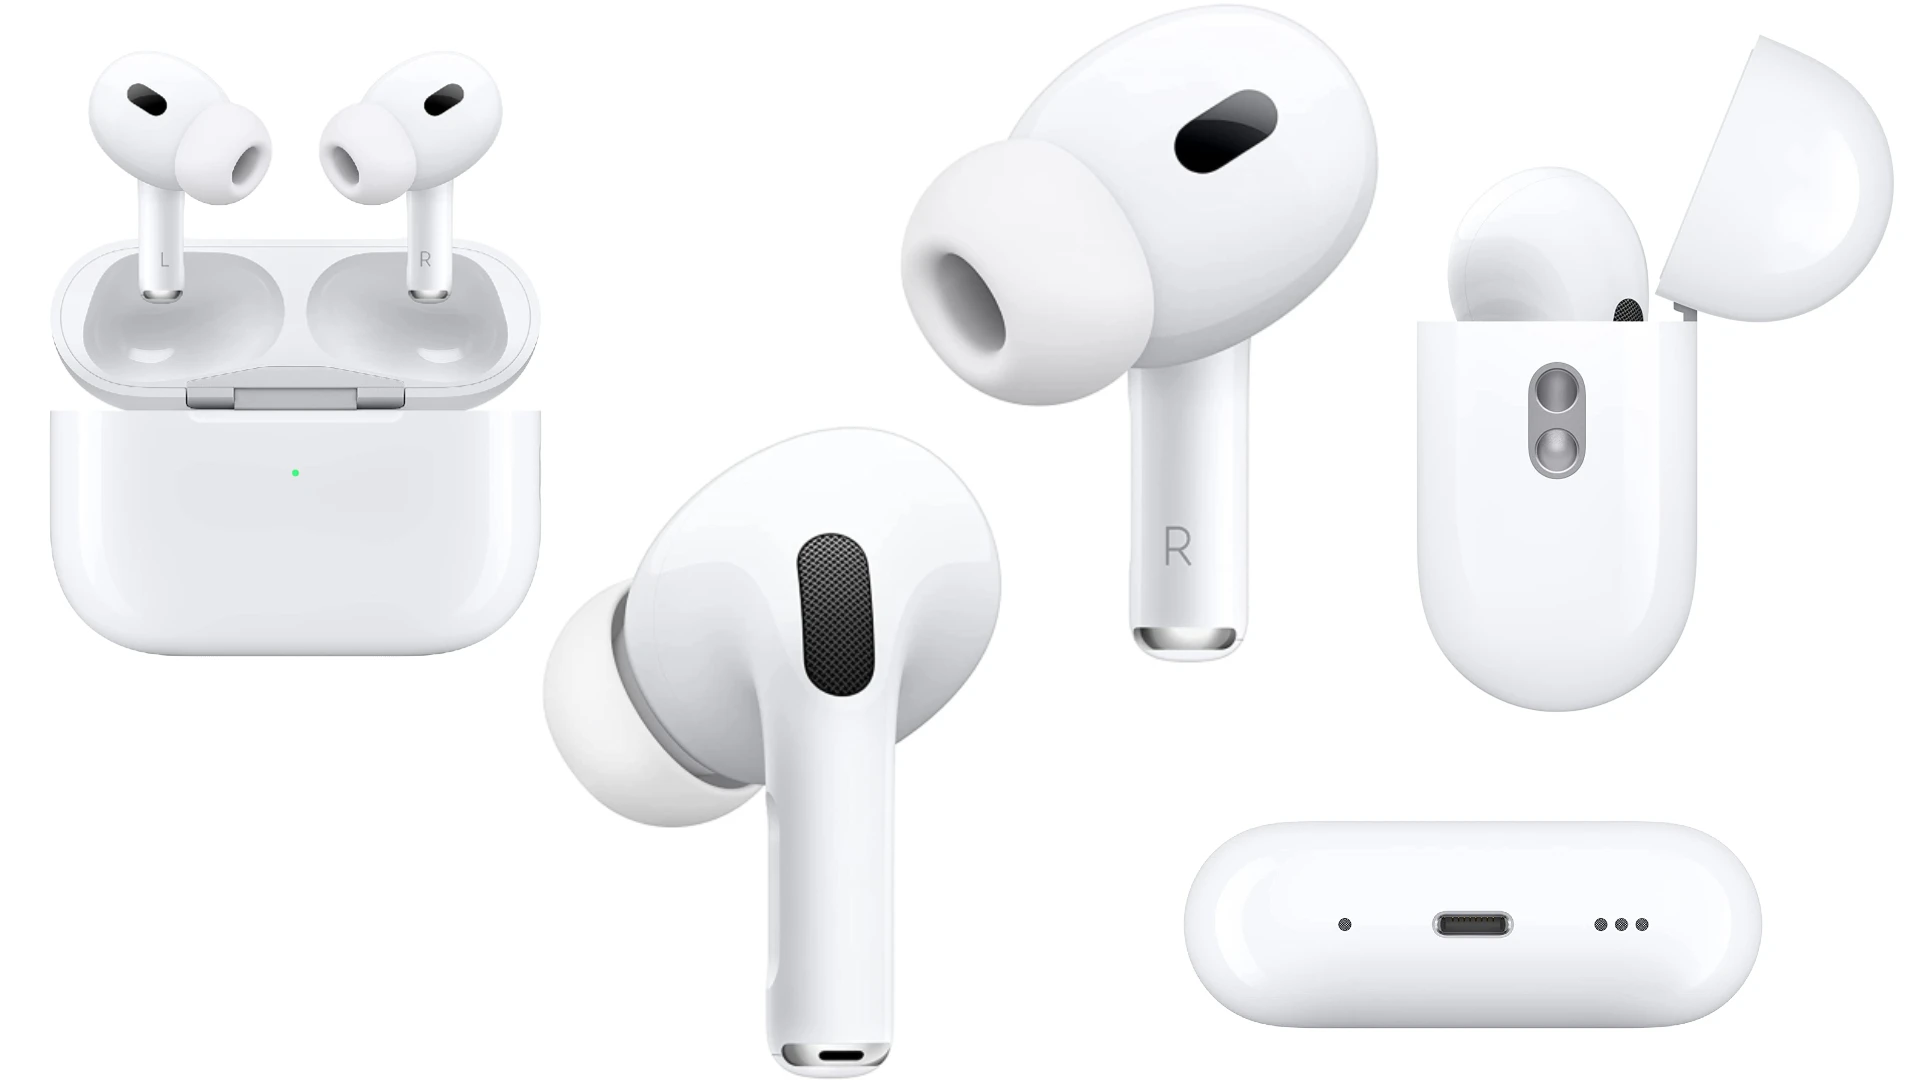 APPLE AIR PODS PRO WIRELESS EARBUDS WITH A MAGSAFE CHARGING CASE